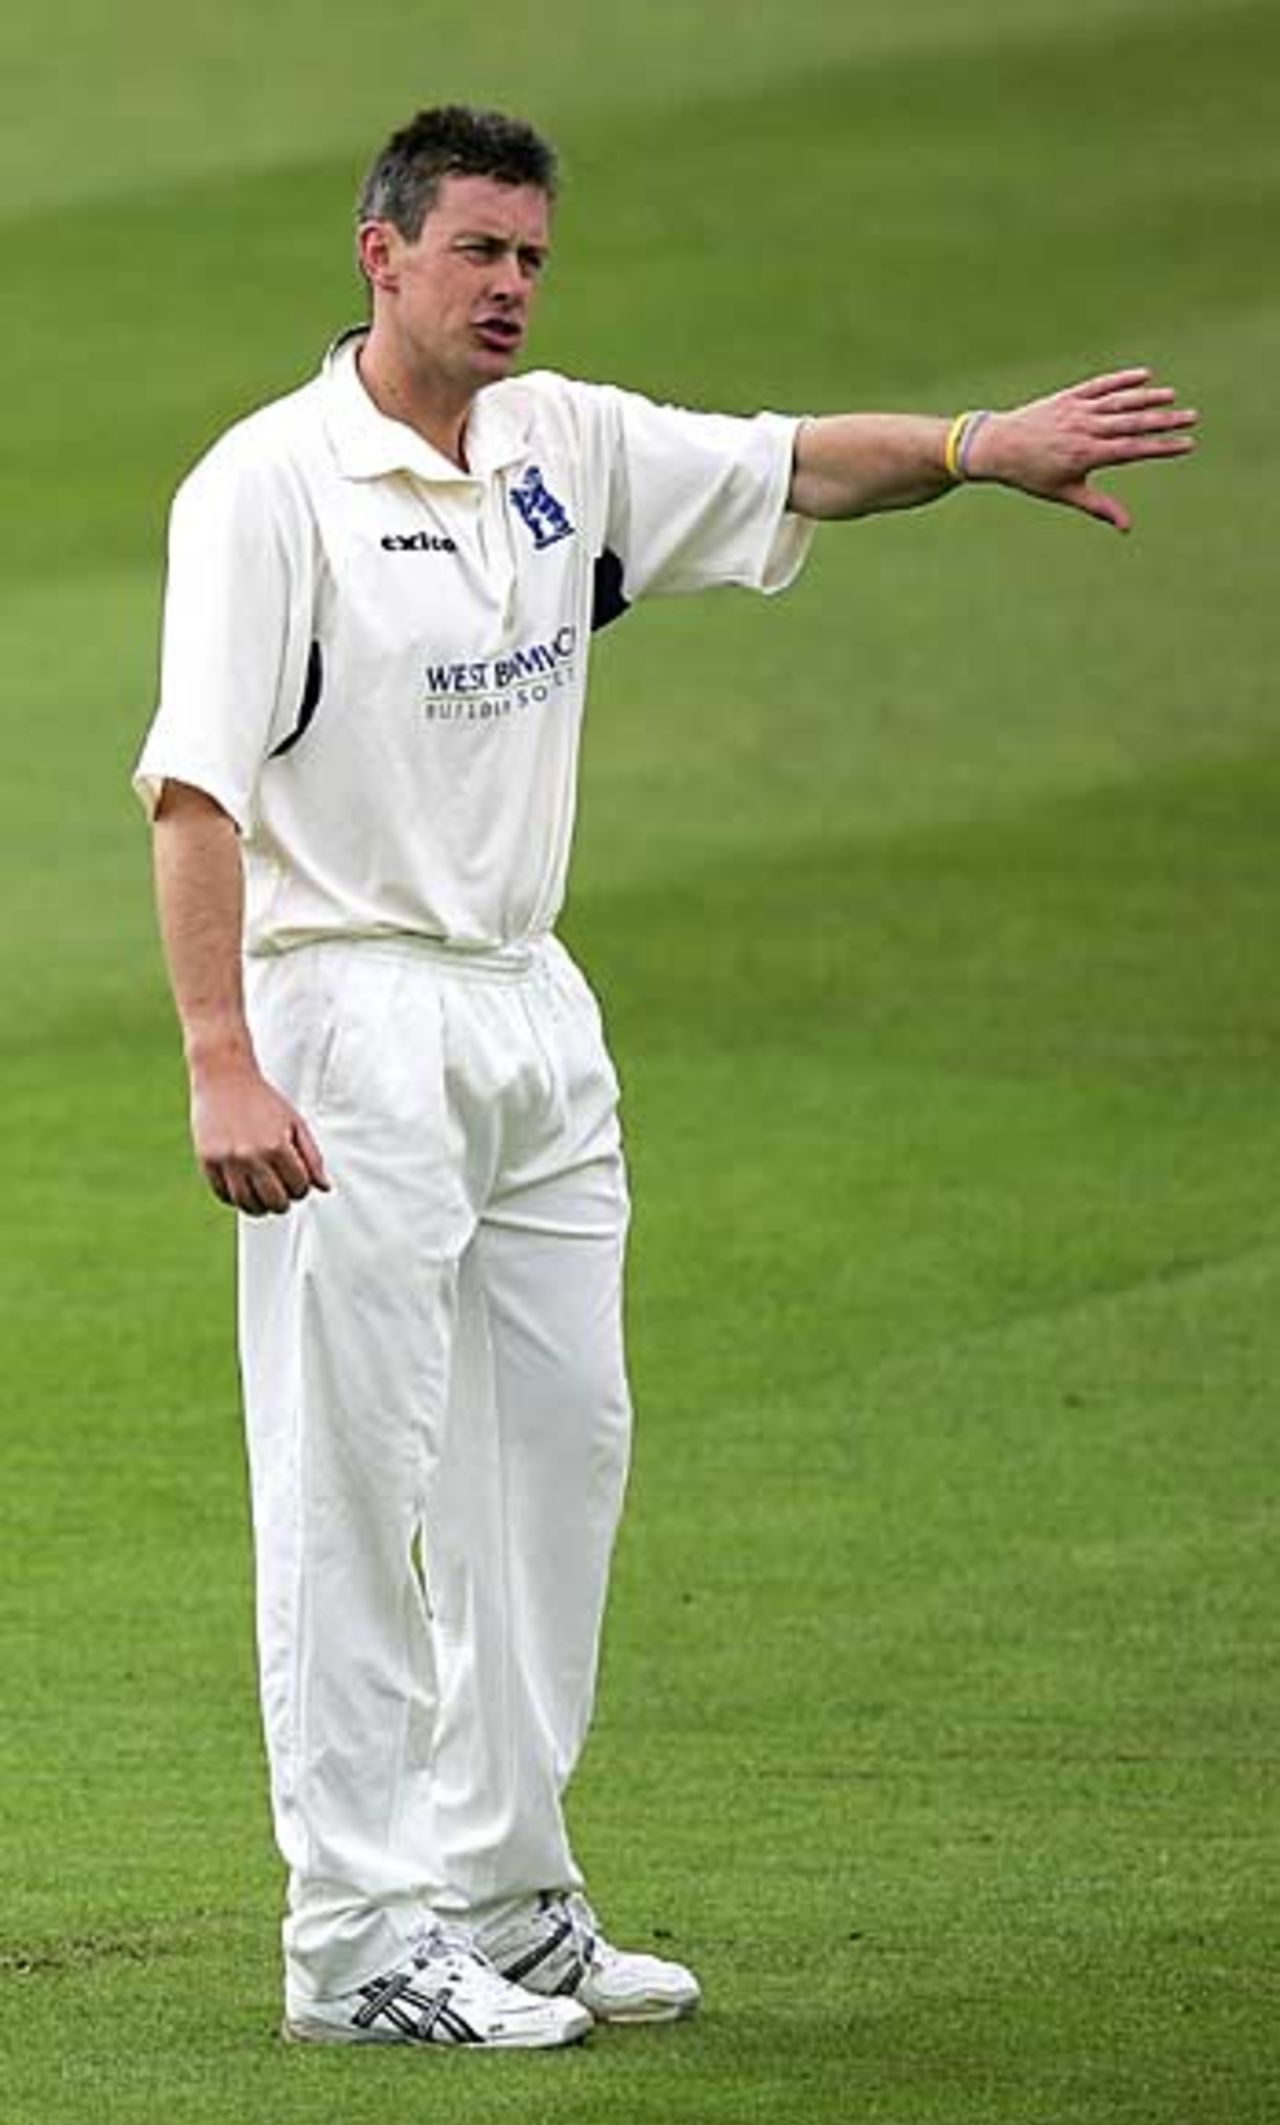 Ashley Giles on his way to a first-day five-for, Warwickshire v Glamorgan, Edgbaston, April 13, 2005